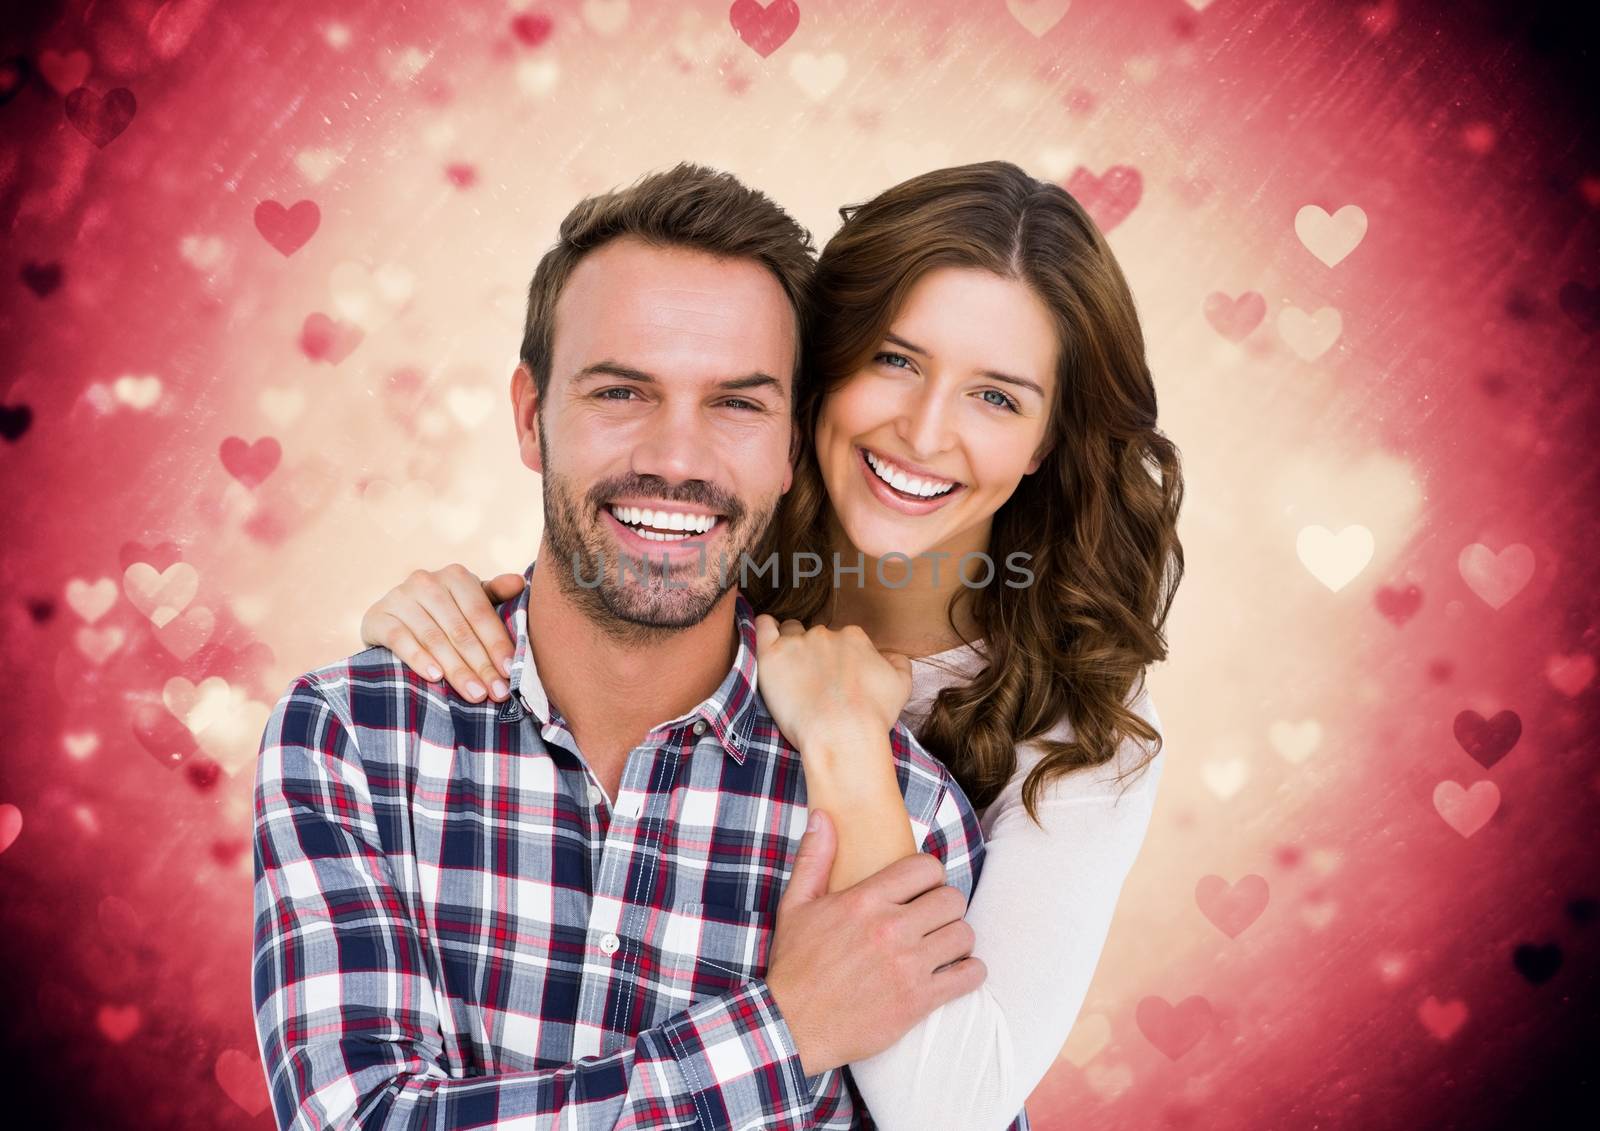 Composite image of romantic couple smiling and relaxing